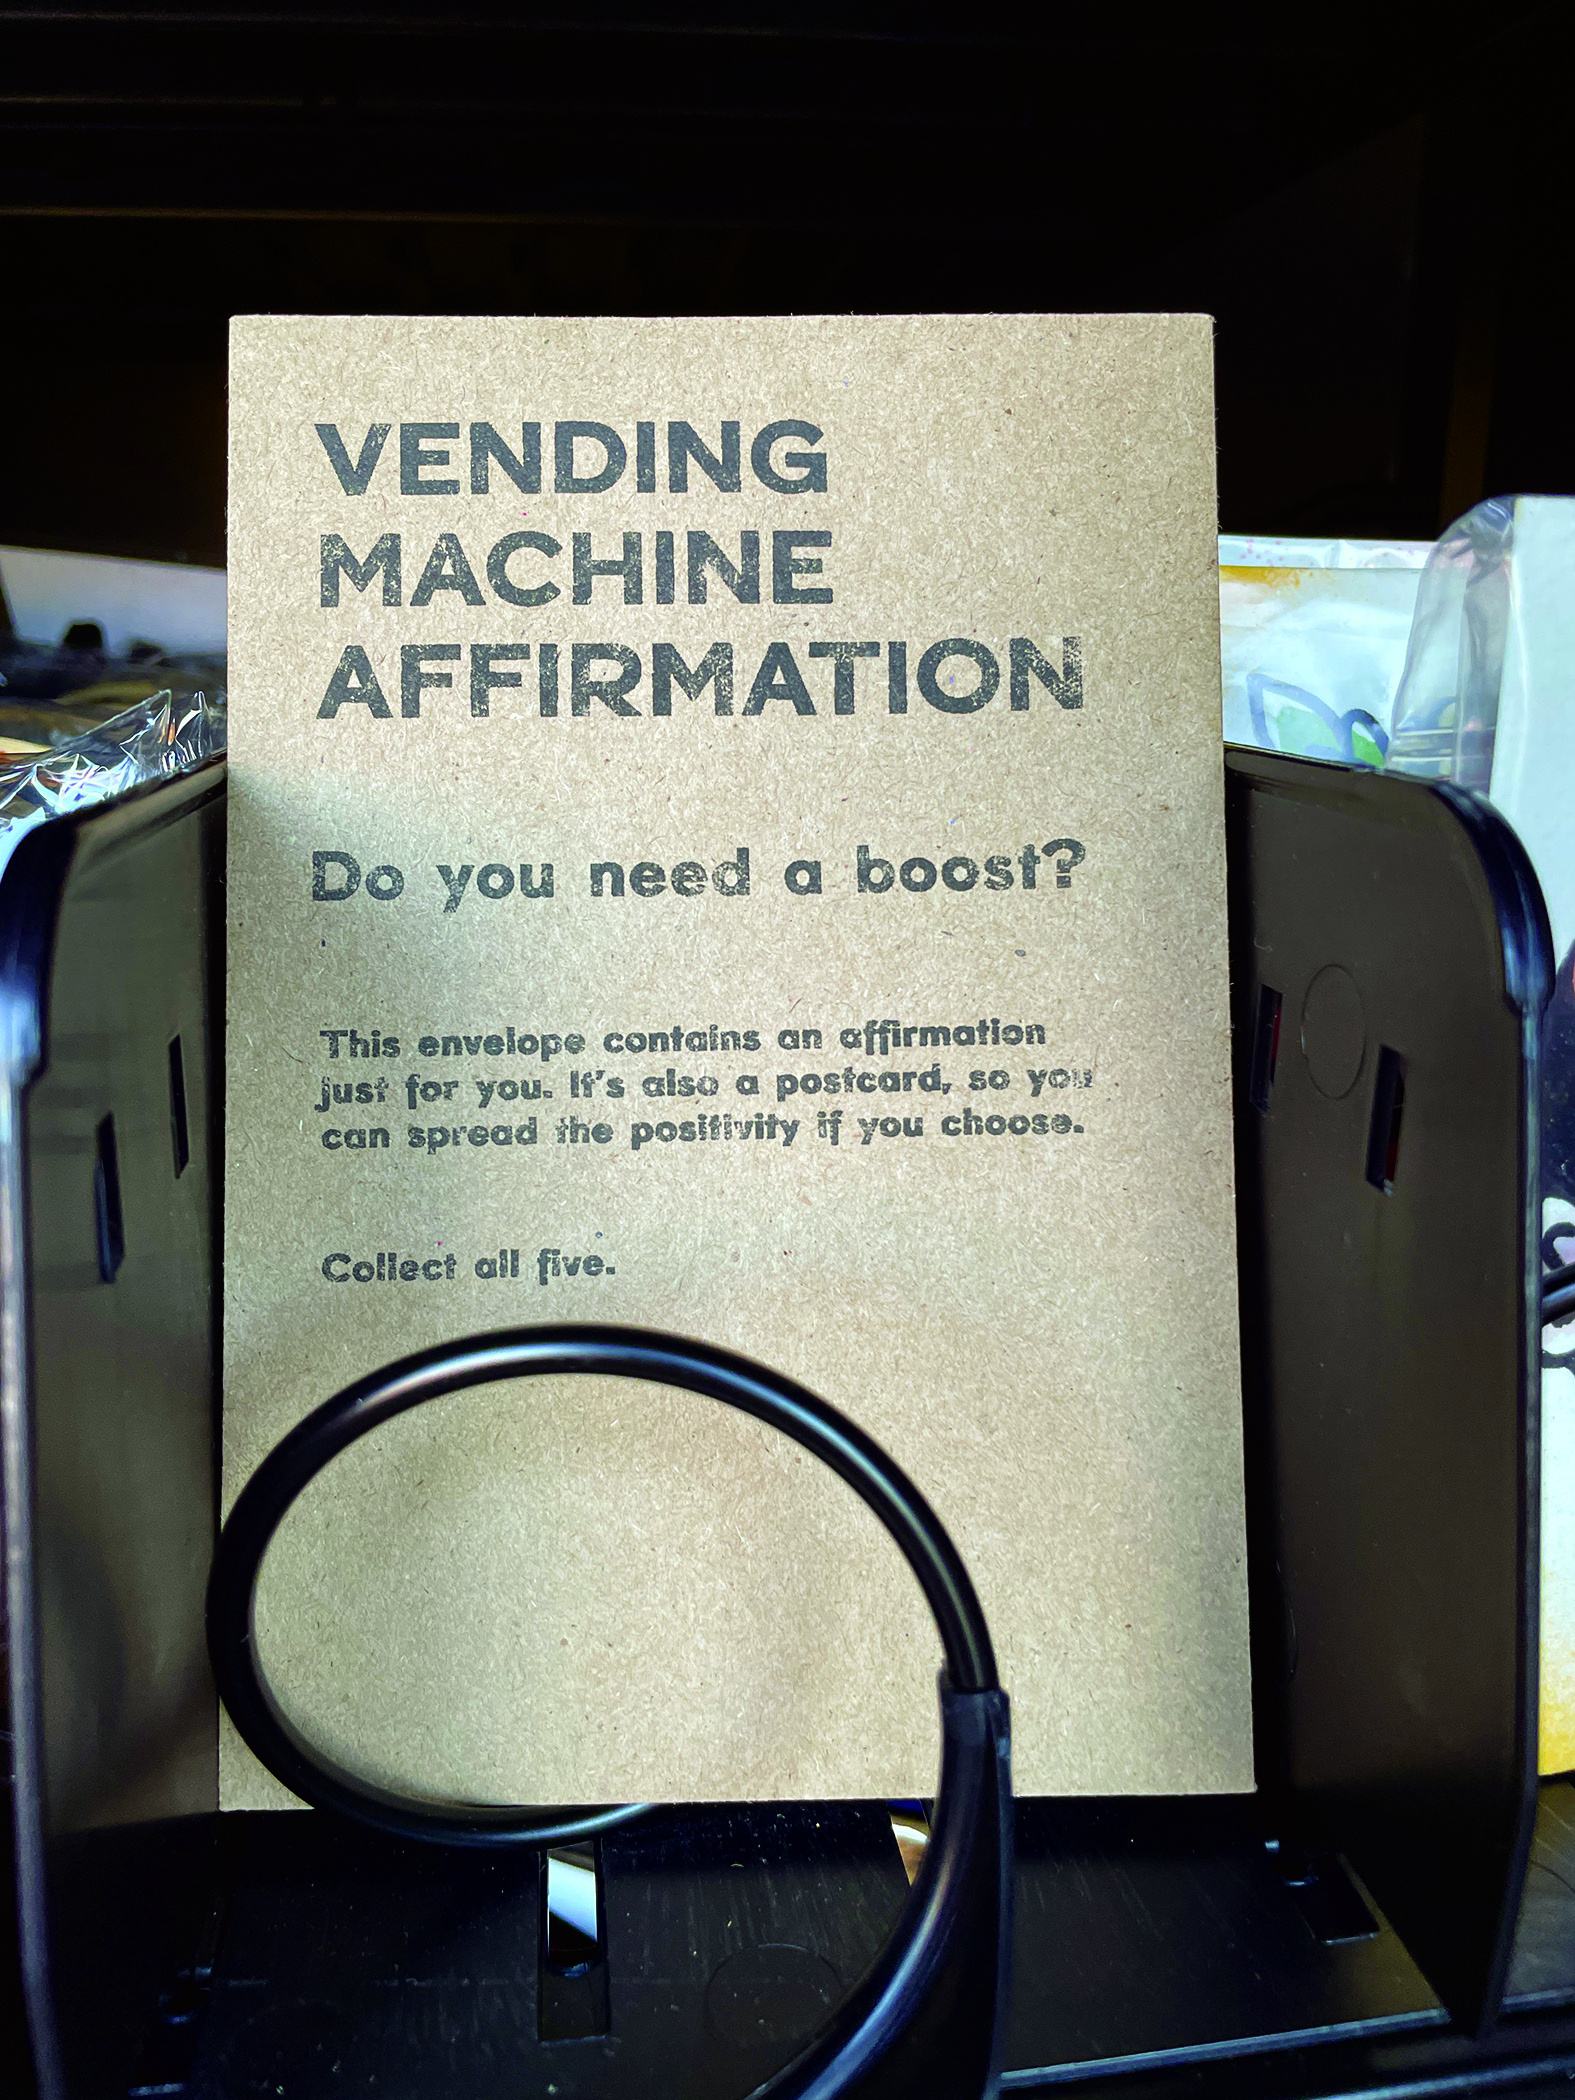 Artist Amy Coon created a series of “Vending Machine Affirmations” as a site specific project for Art Vending North Adams.